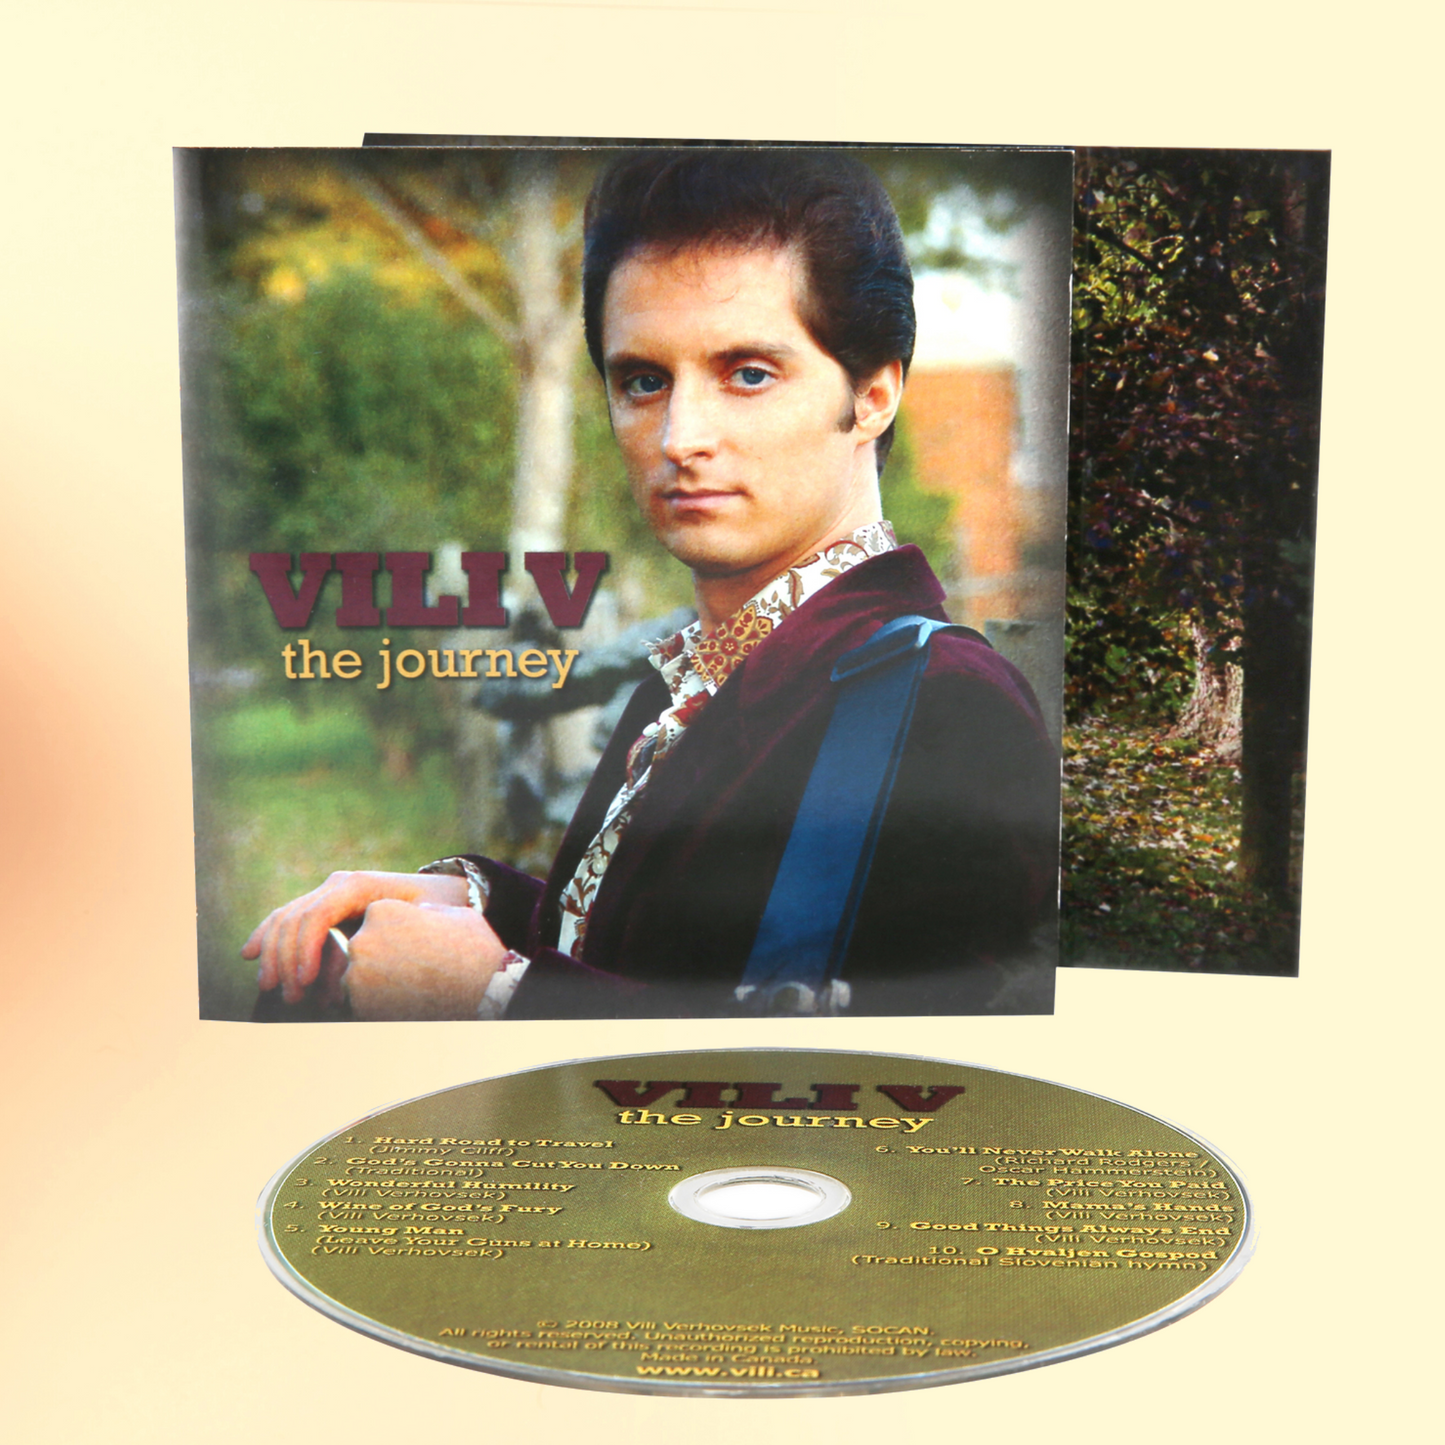 The Journey - (CD - Physical)